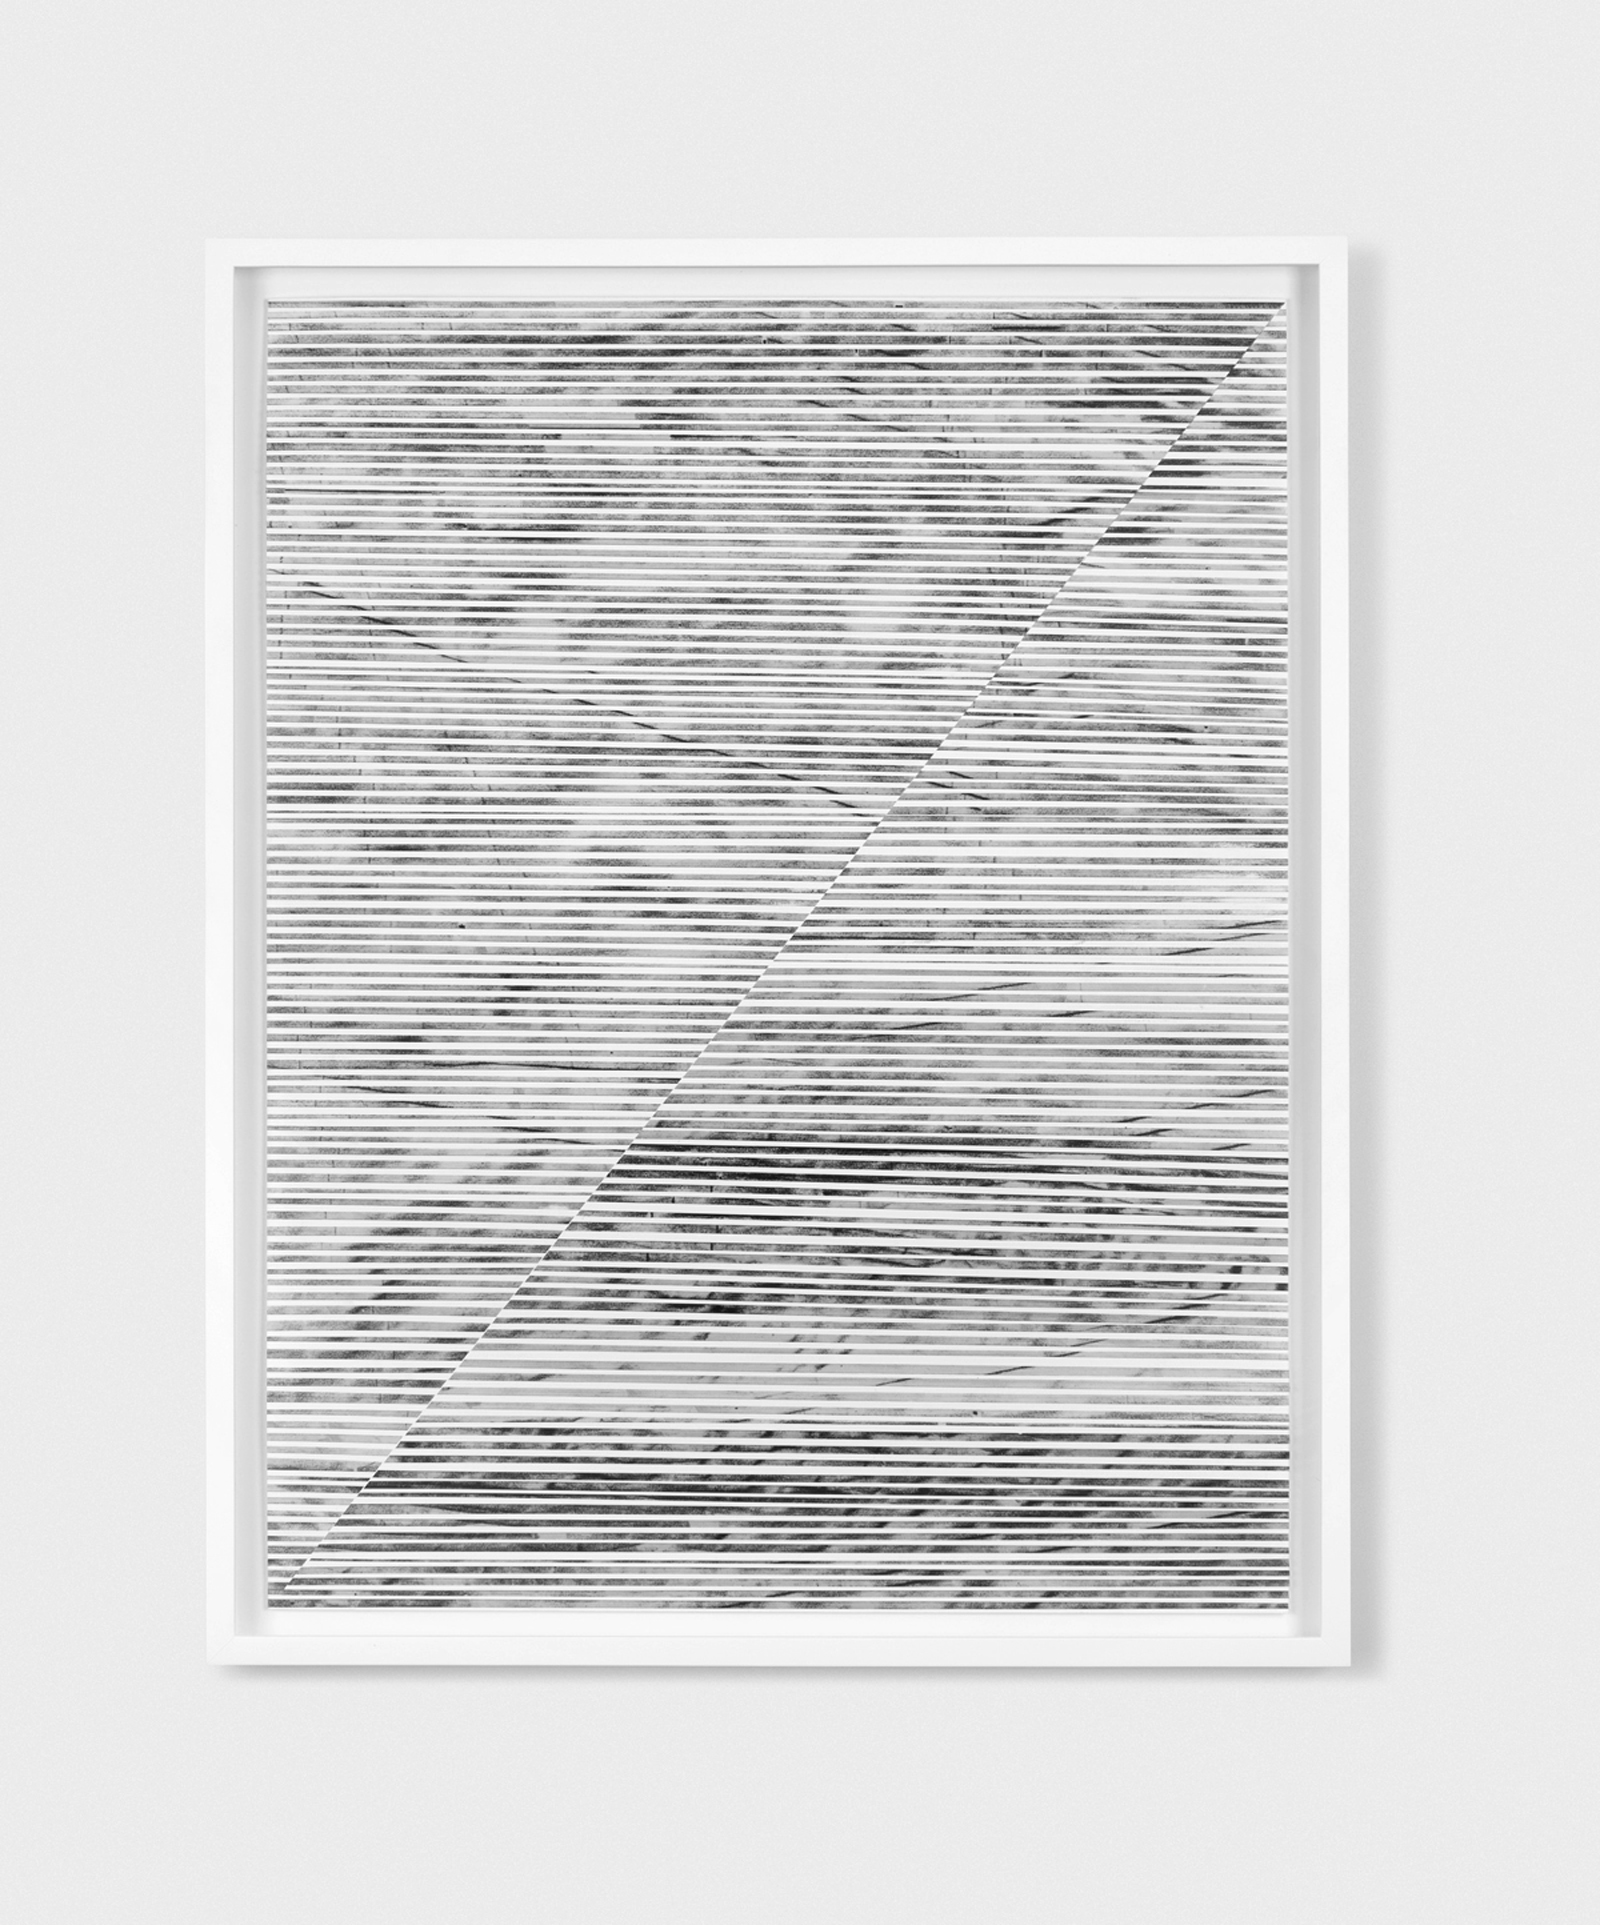    Untitled (the line between #1)  2014, charcoal and powdered graphite on translucent tape, cut and arranged on cotton paper, 22 x 28 inches  